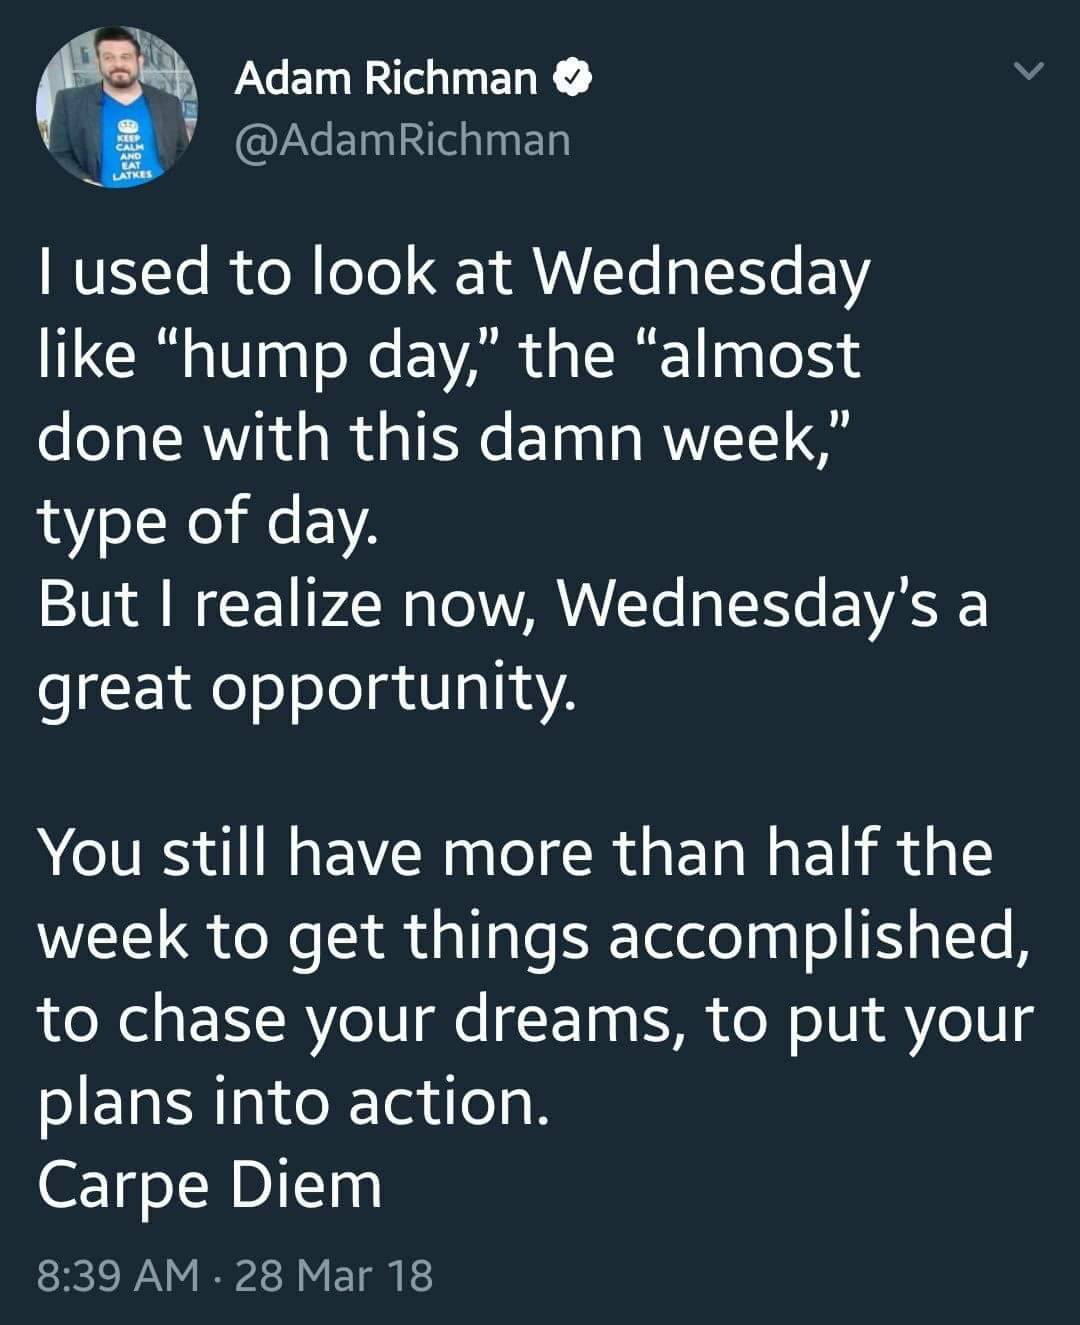 windows 7 - Adam Richman Ca And Latkes Tused to look at Wednesday "hump day," the almost done with this damn week," type of day. But I realize now, Wednesday's a great opportunity. You still have more than half the week to get things accomplished, to chas